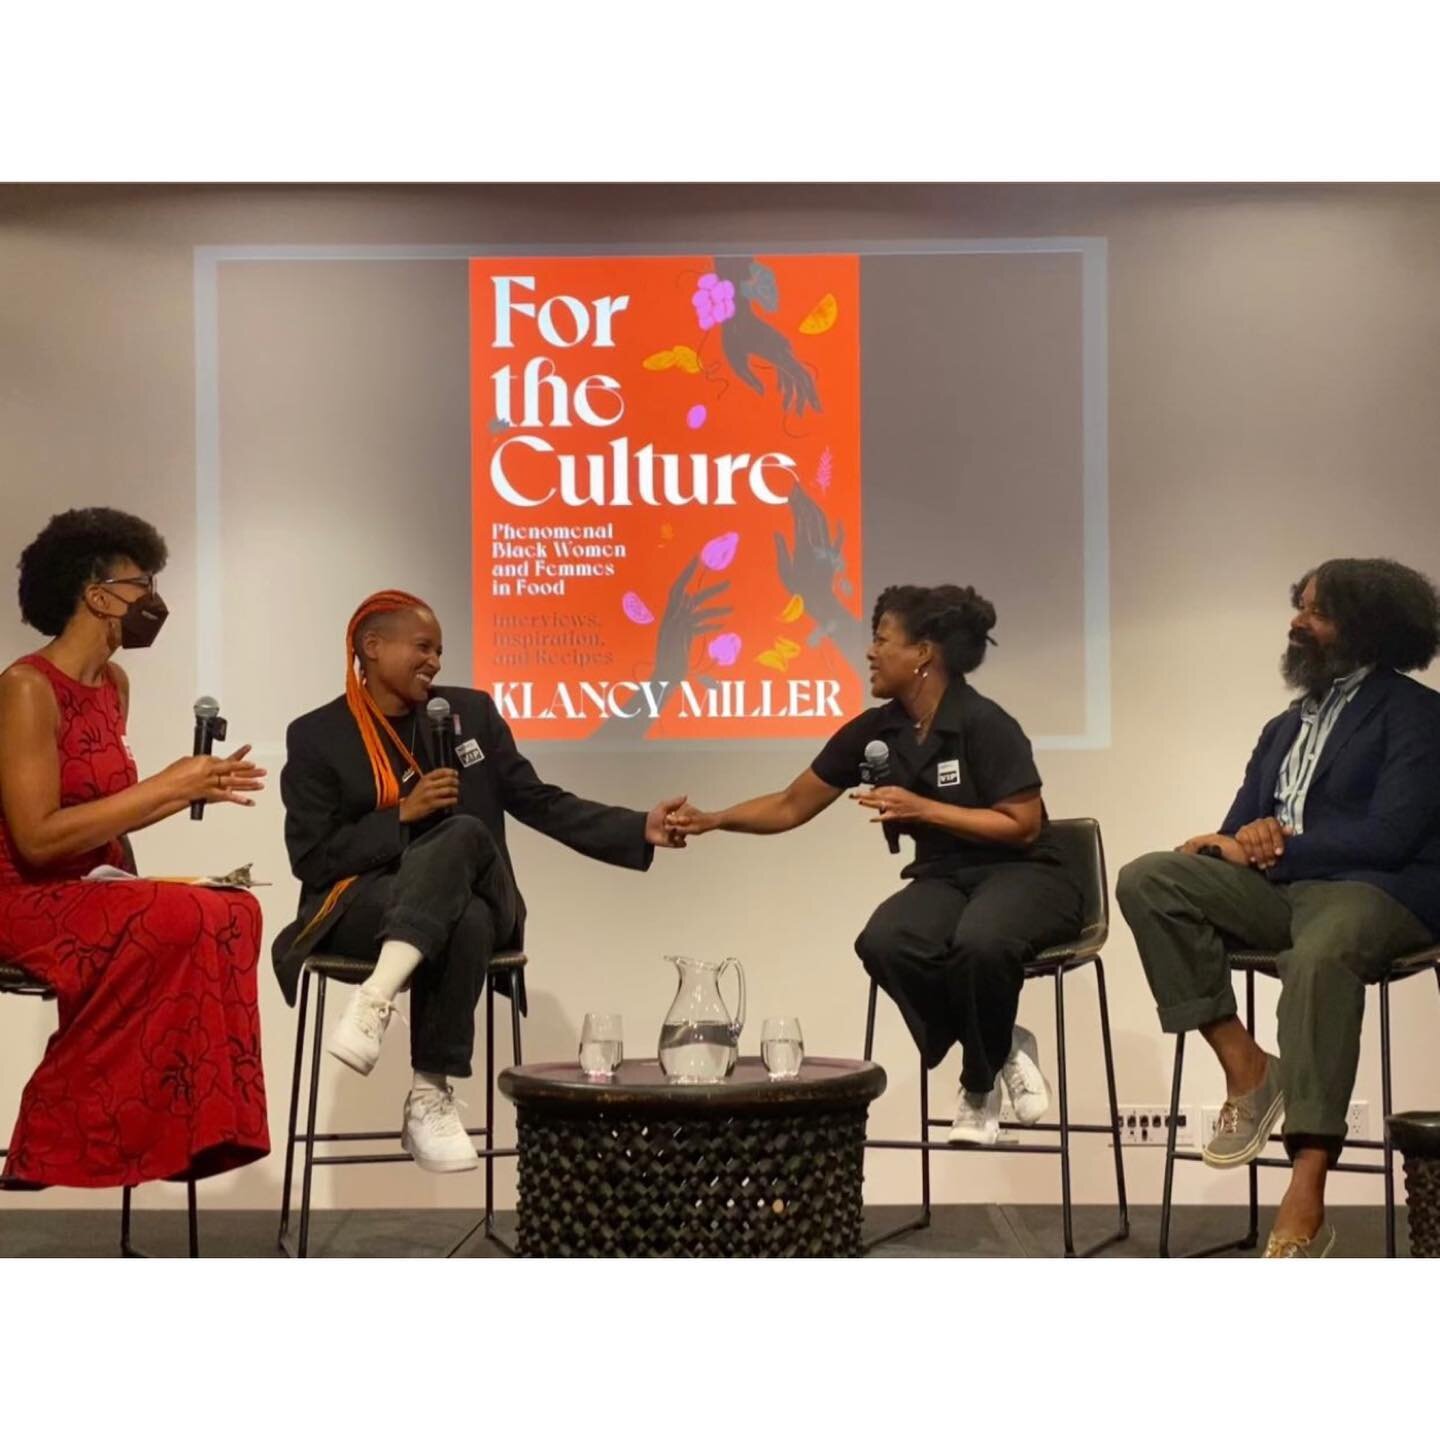 This time last week I was in San Francisco. My first book event there at @moadsf was beautifully curated and organized by @justuskitchen and Nia McCallister. Jocelyn led the conversation with @george.mccalman (creative director for the book For the C